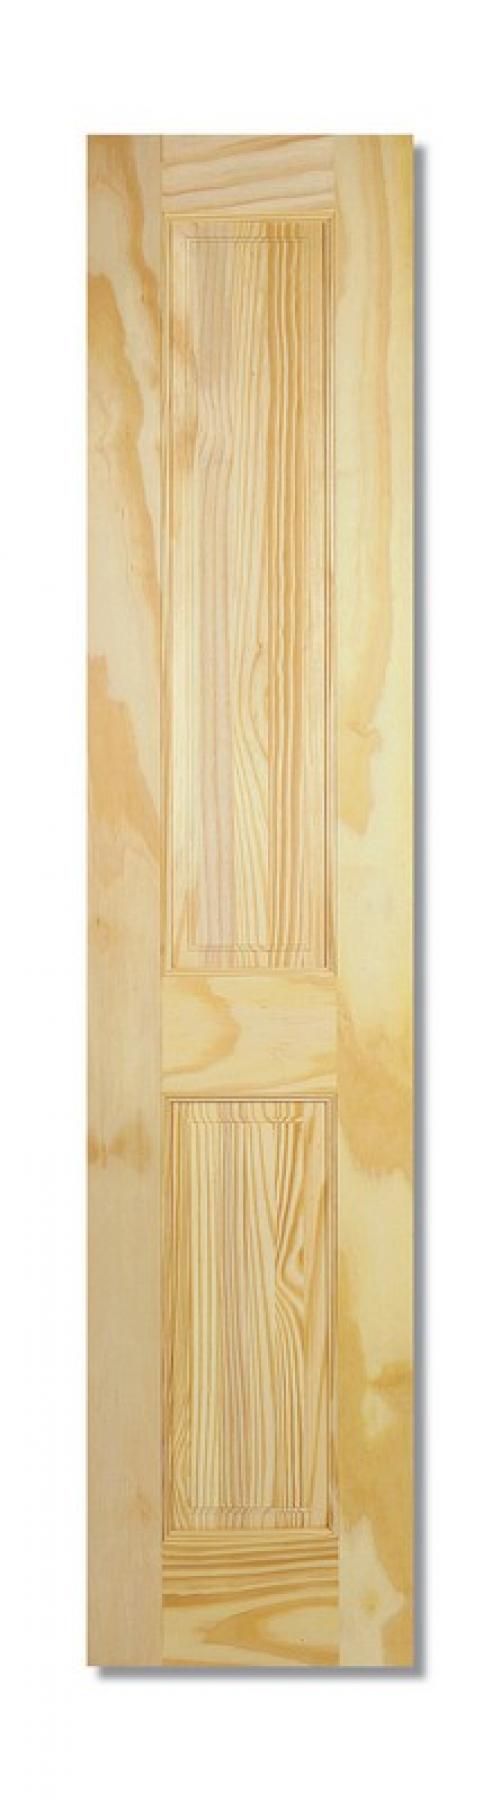 Image for 78X18 2 PANEL CLEAR PINE